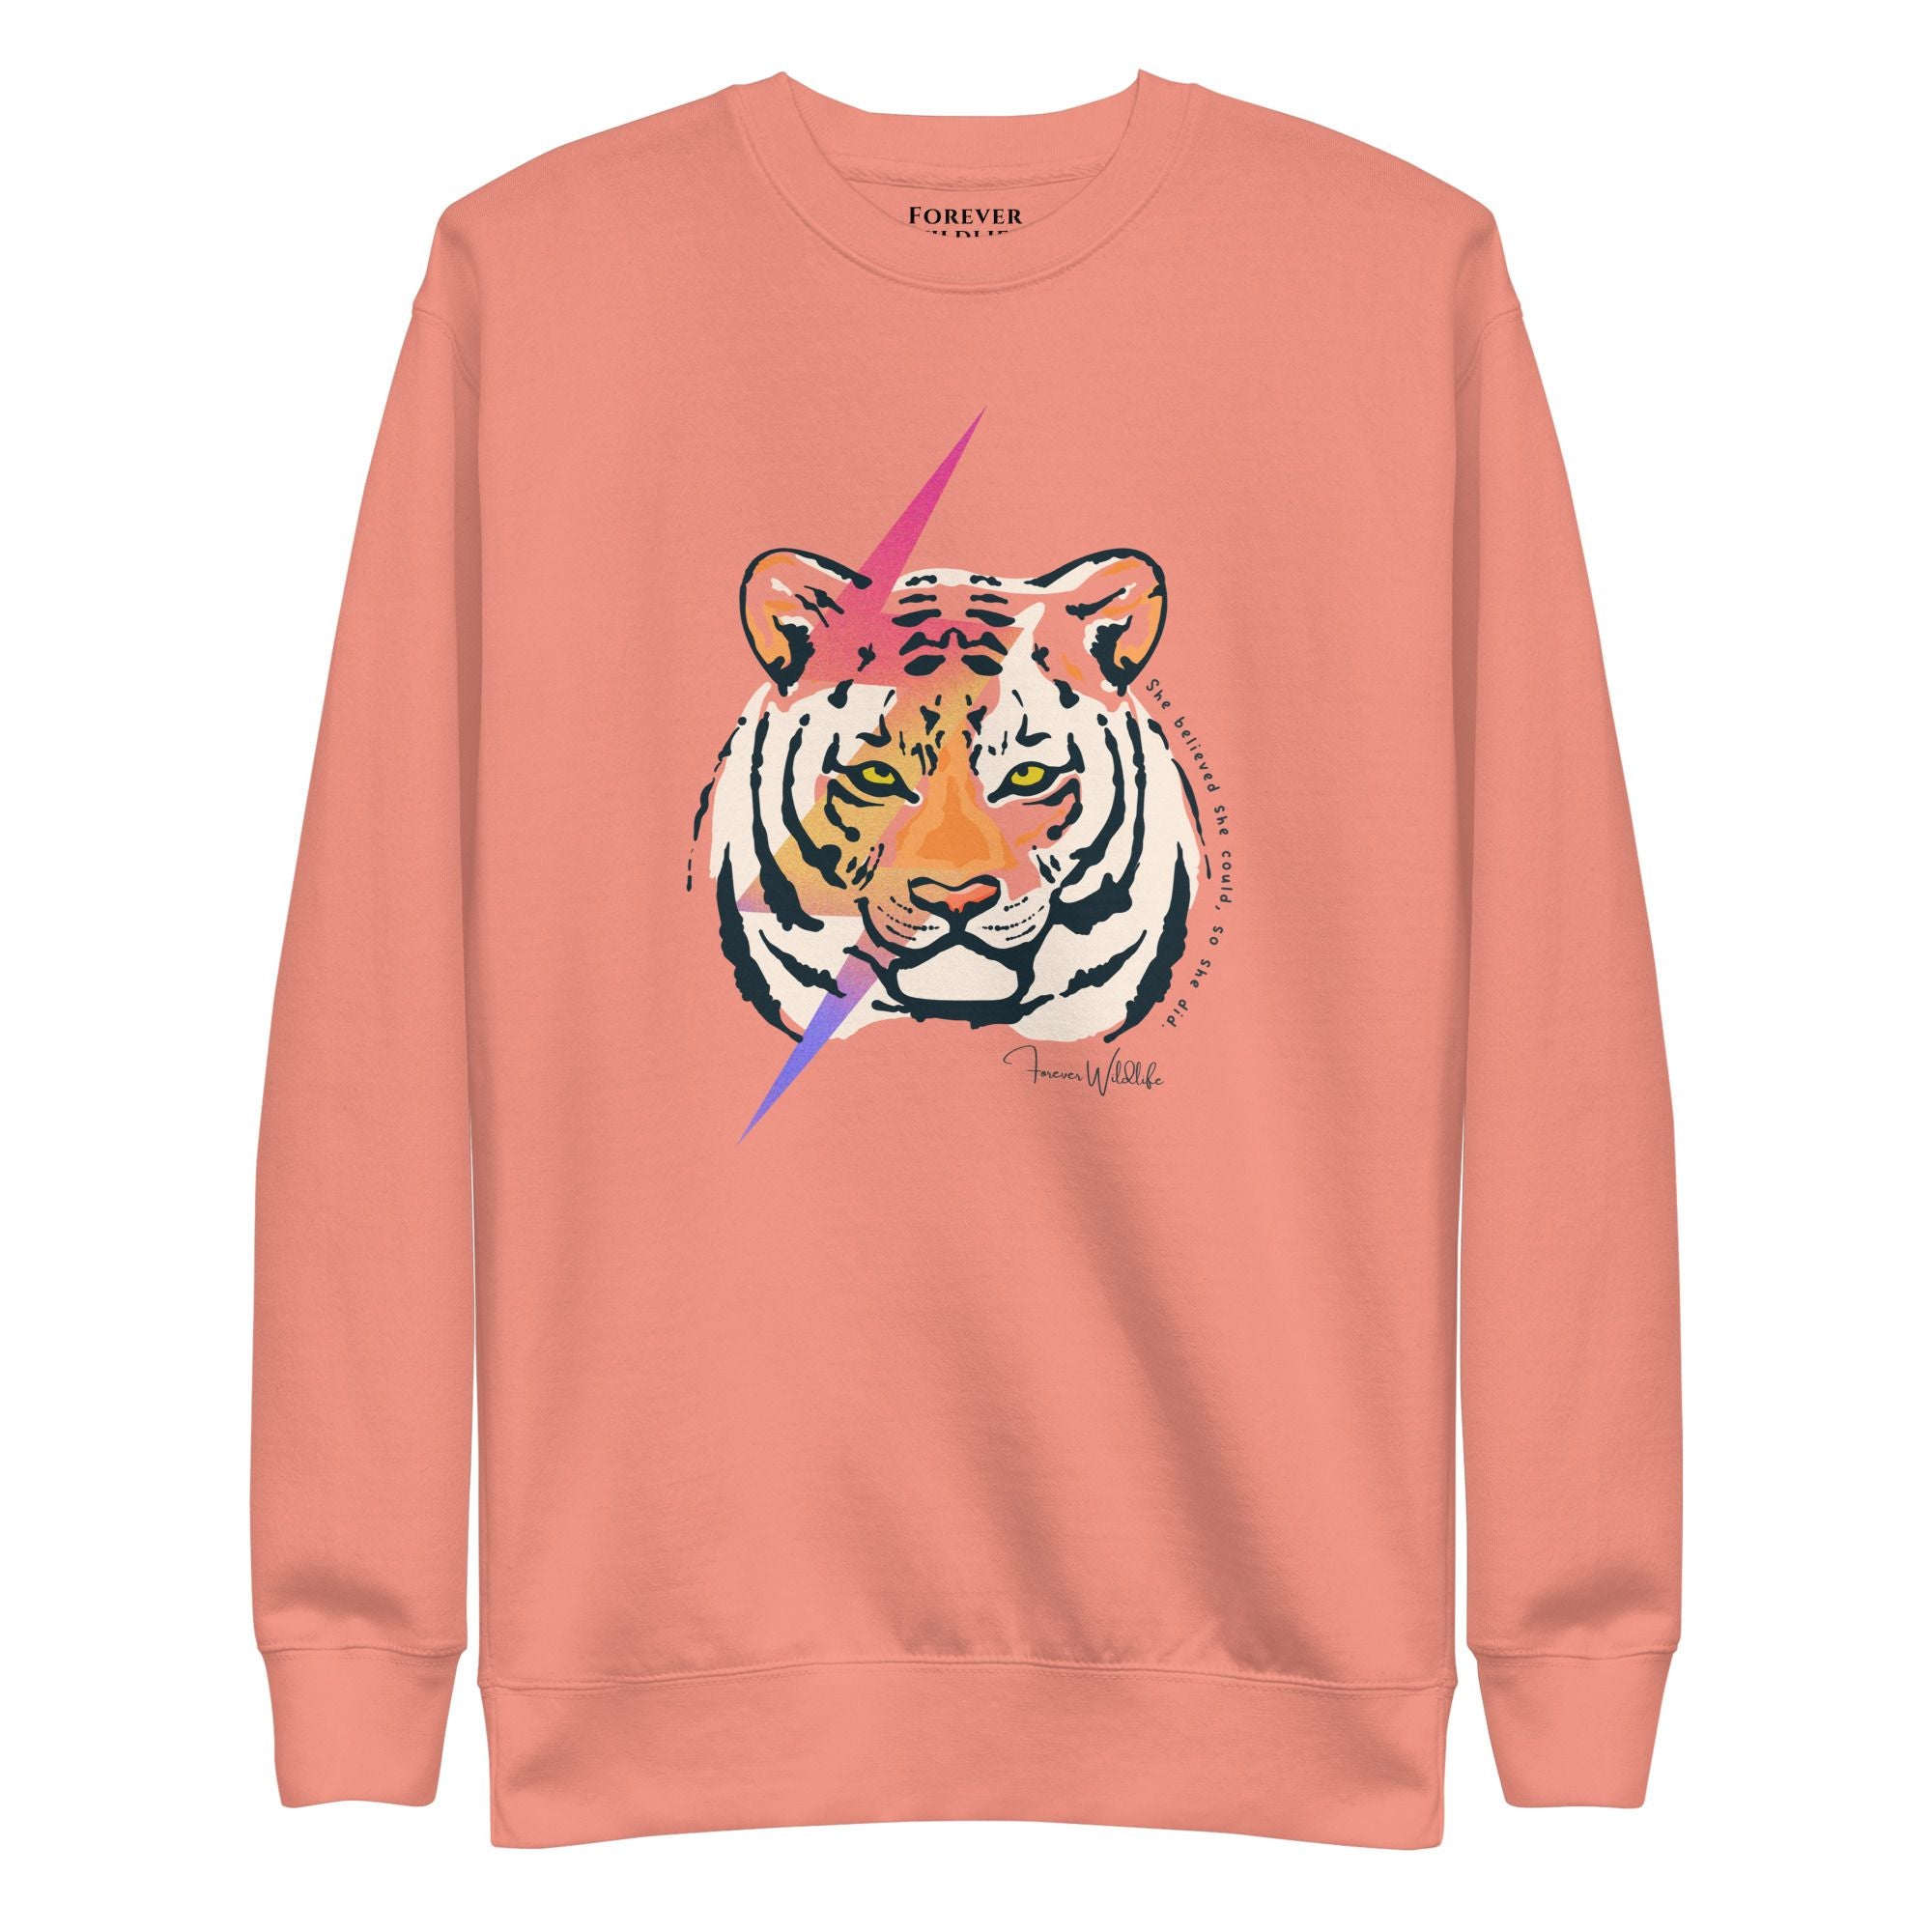 Tiger Sweatshirt in Rose-Premium Wildlife Animal Inspiration Sweatshirt Design with 'She Believed She Could So She Did' text, part of Wildlife Sweatshirts & Clothing from Forever Wildlife.